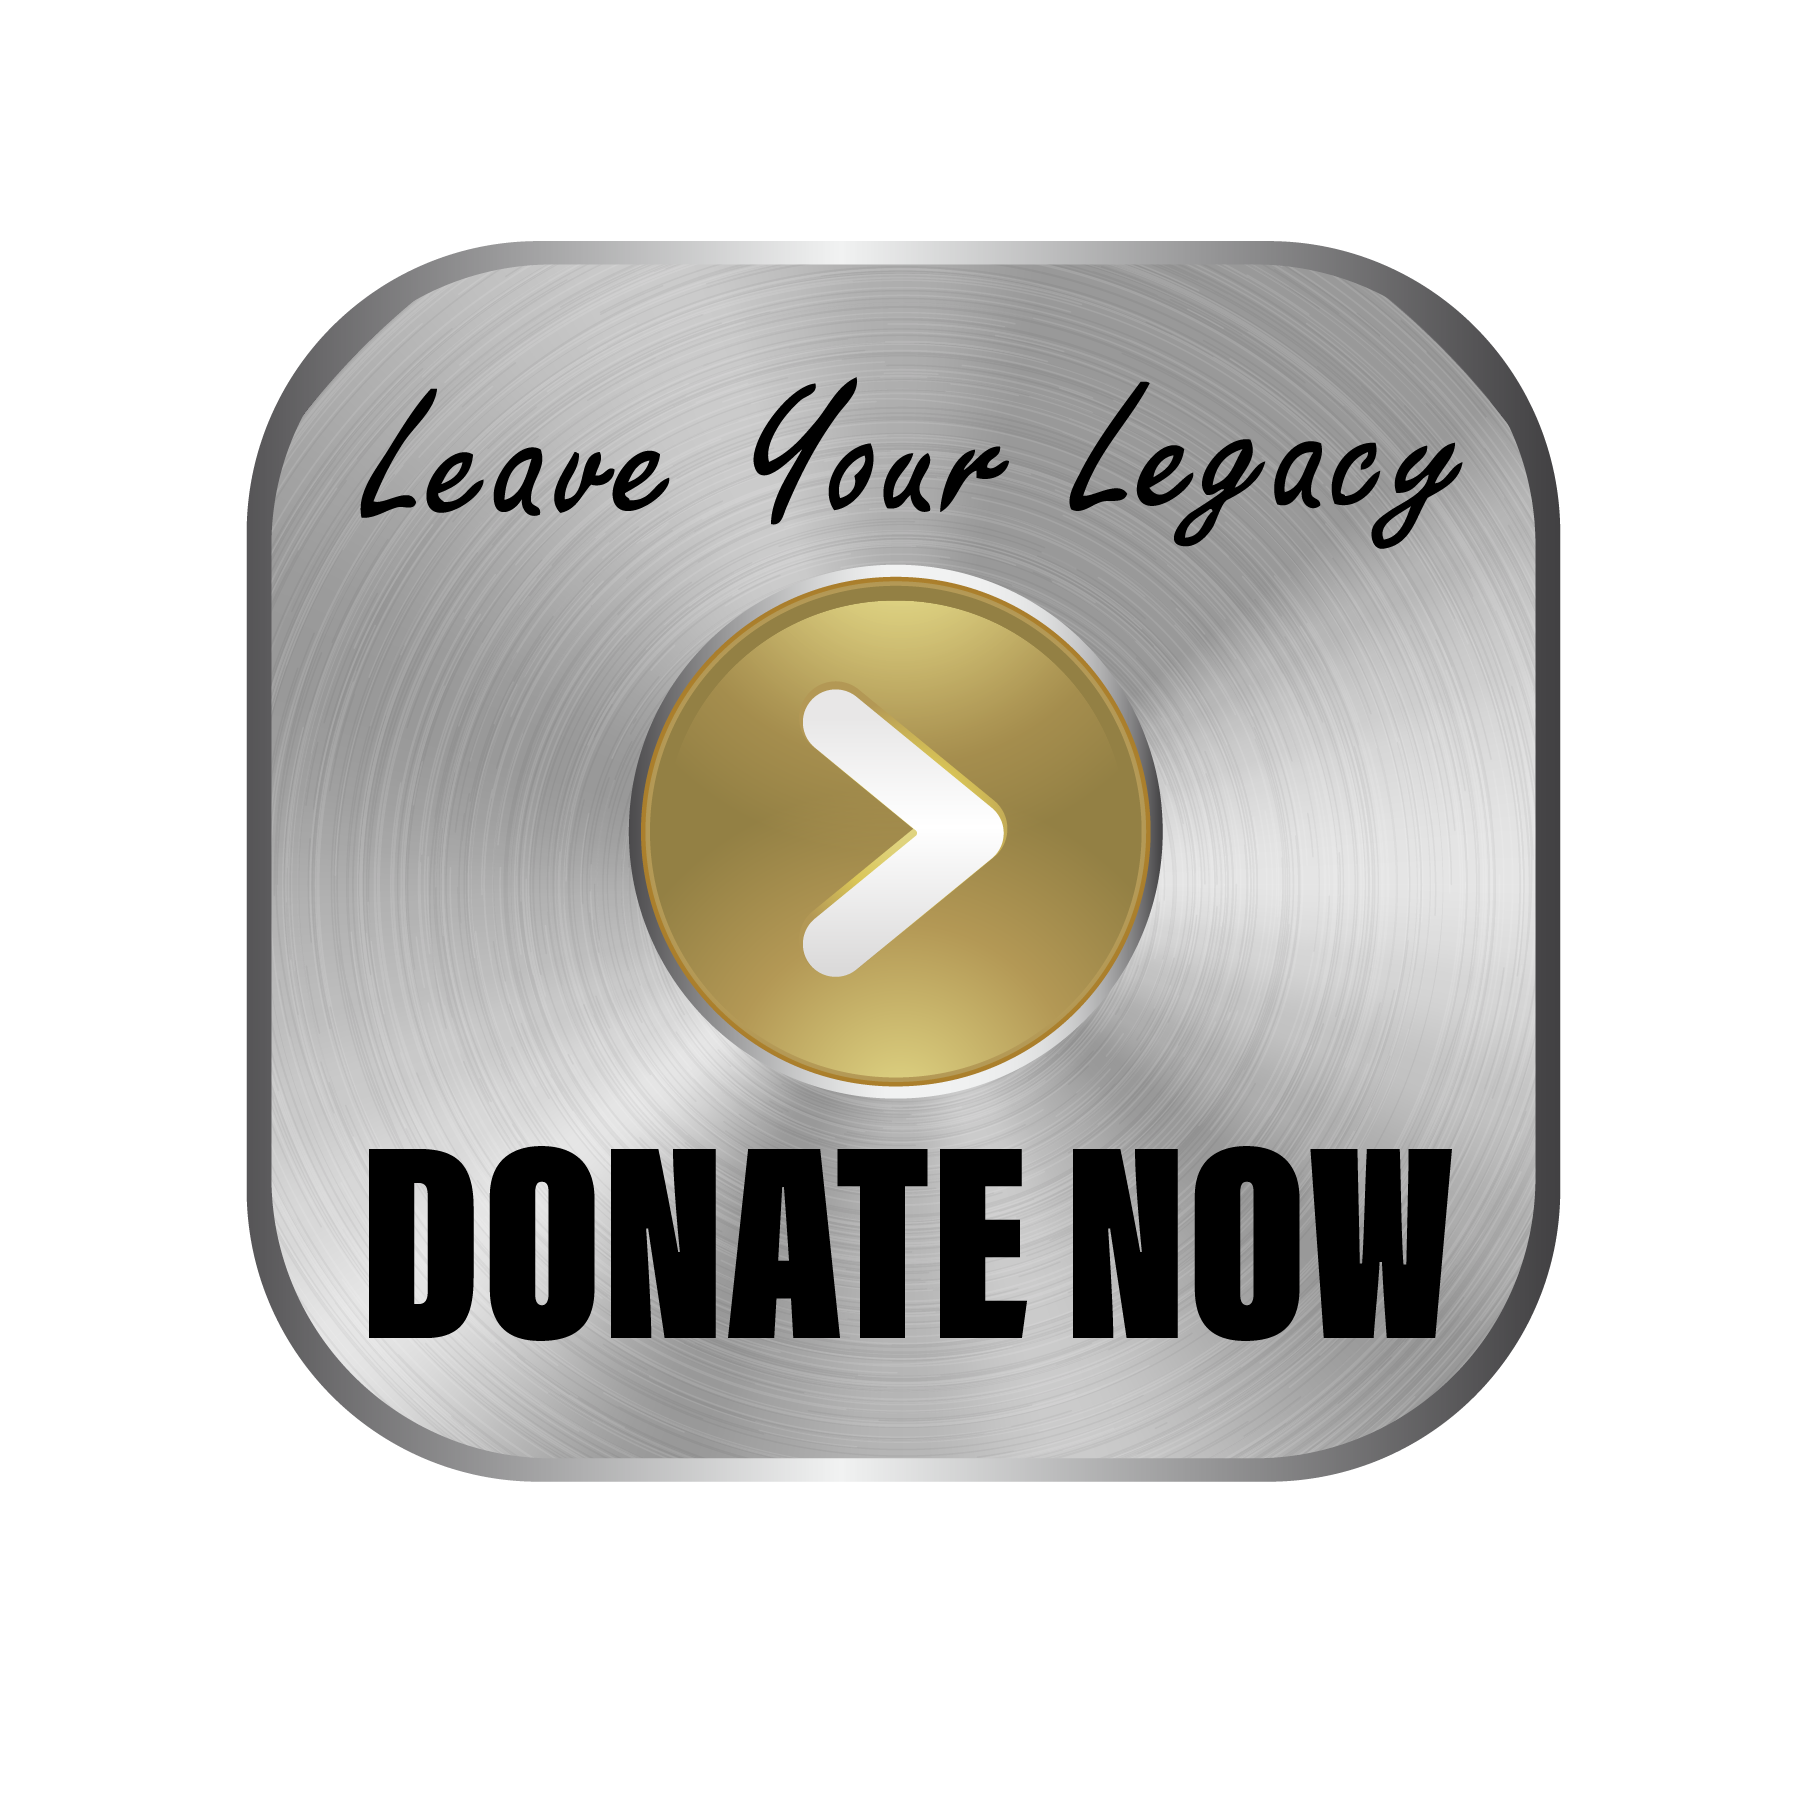 Leave Your Legacy by Donating Now